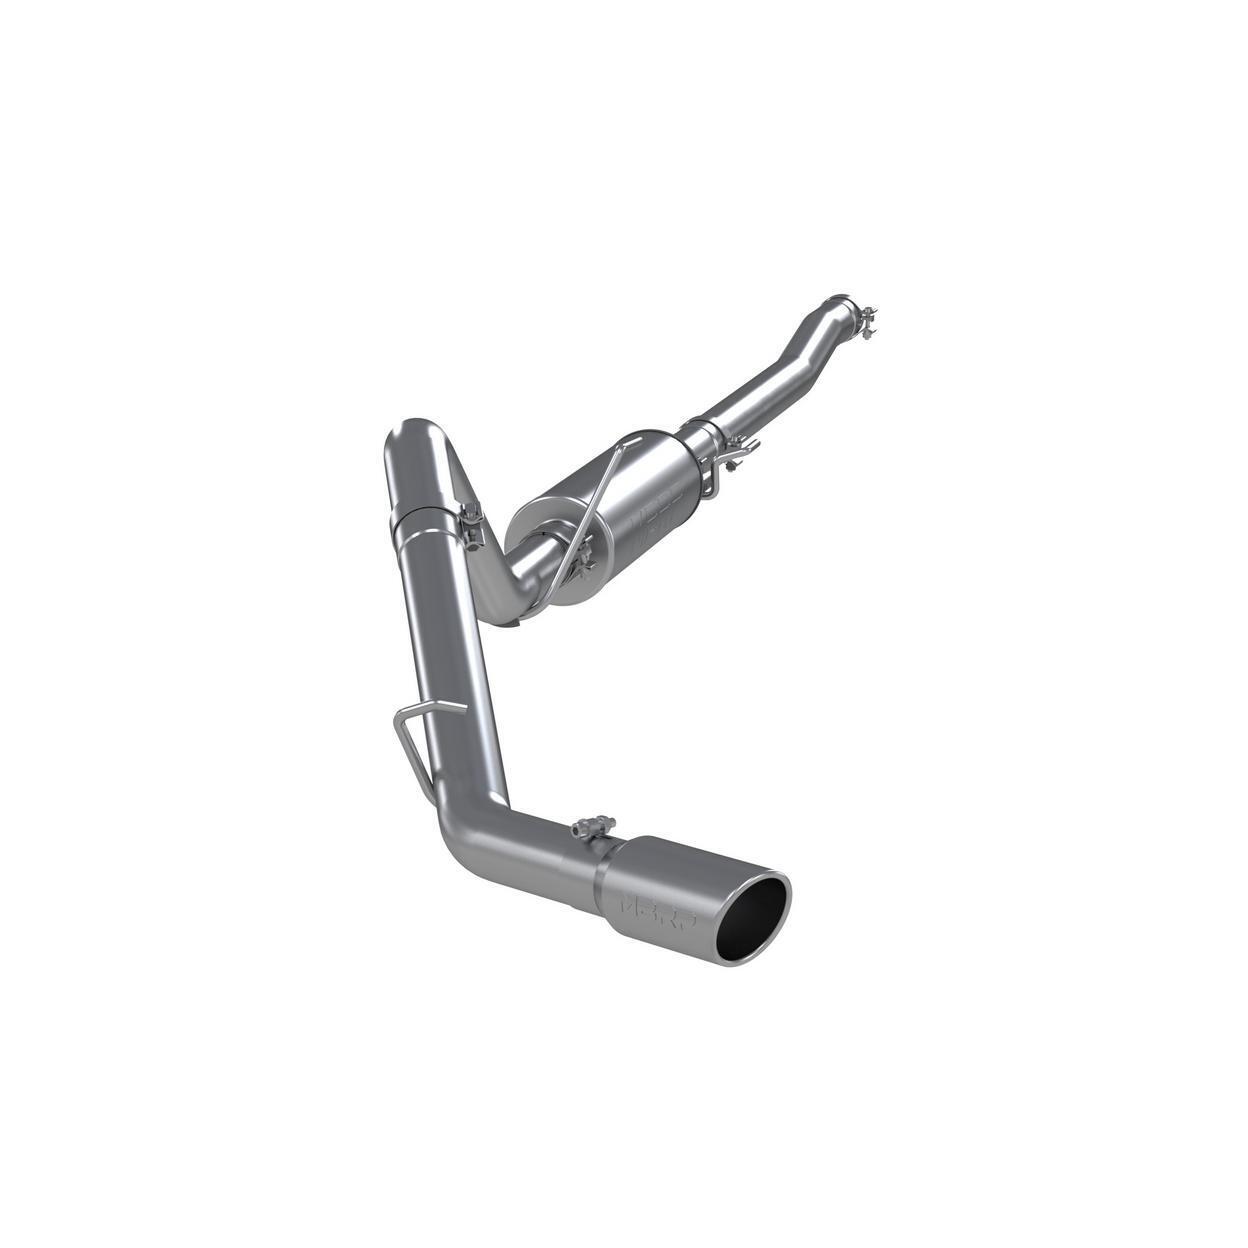 MBRP Exhaust S5148409-XS Exhaust System Kit for 2008 Dodge Ram 2500